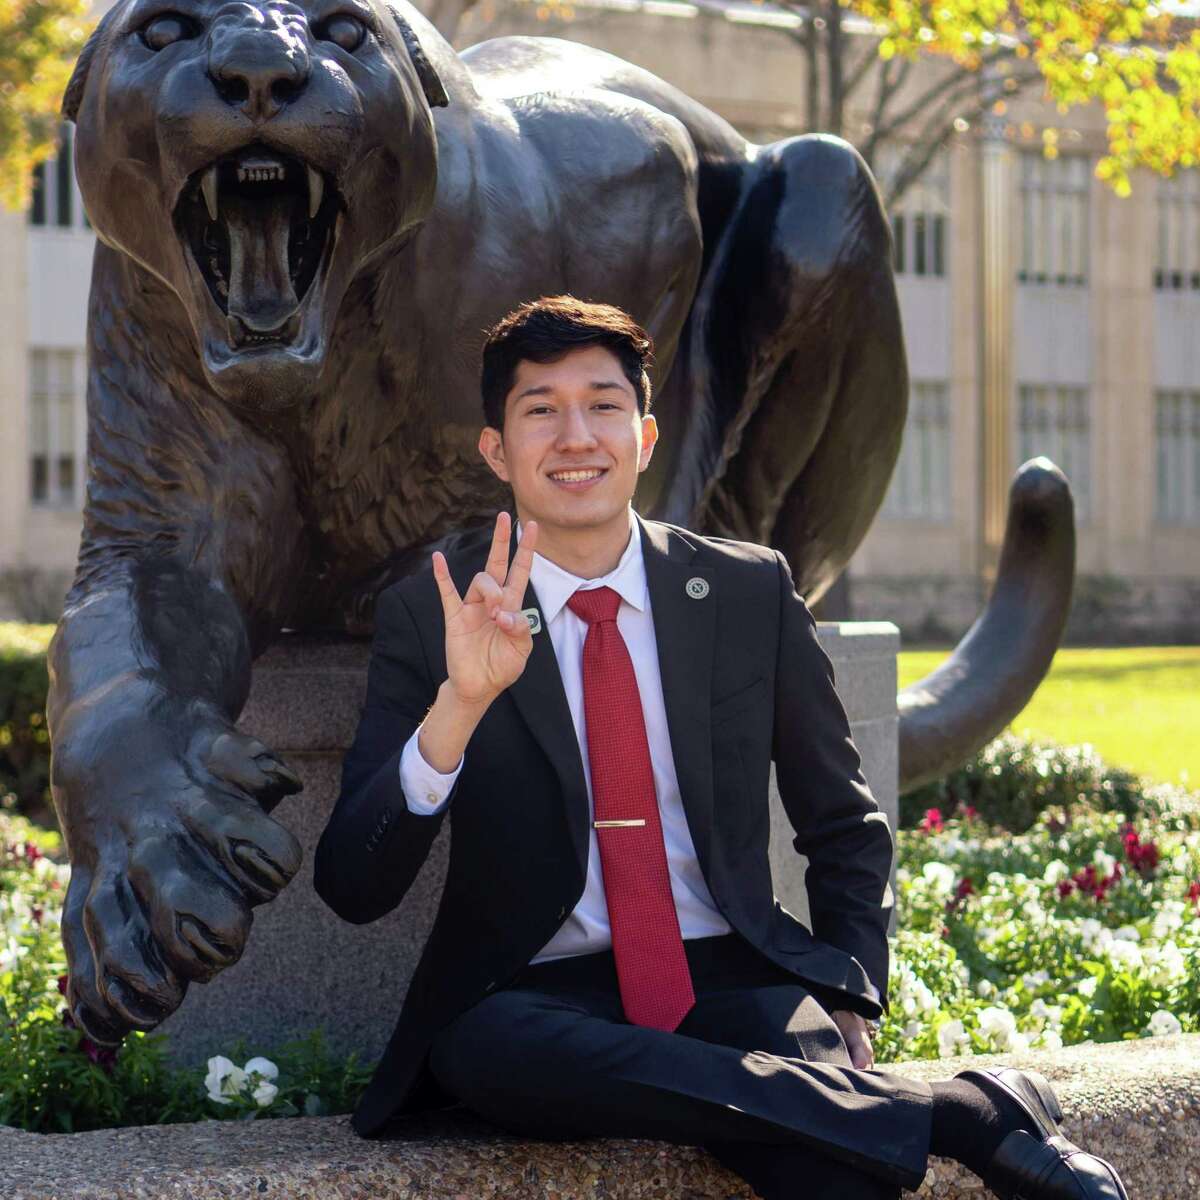 Christian Avalos, who transferred to UH from Houston Community College and is now a student on the C.T. Bauer College of Business and president of the UH Hispanic Business Student Association.